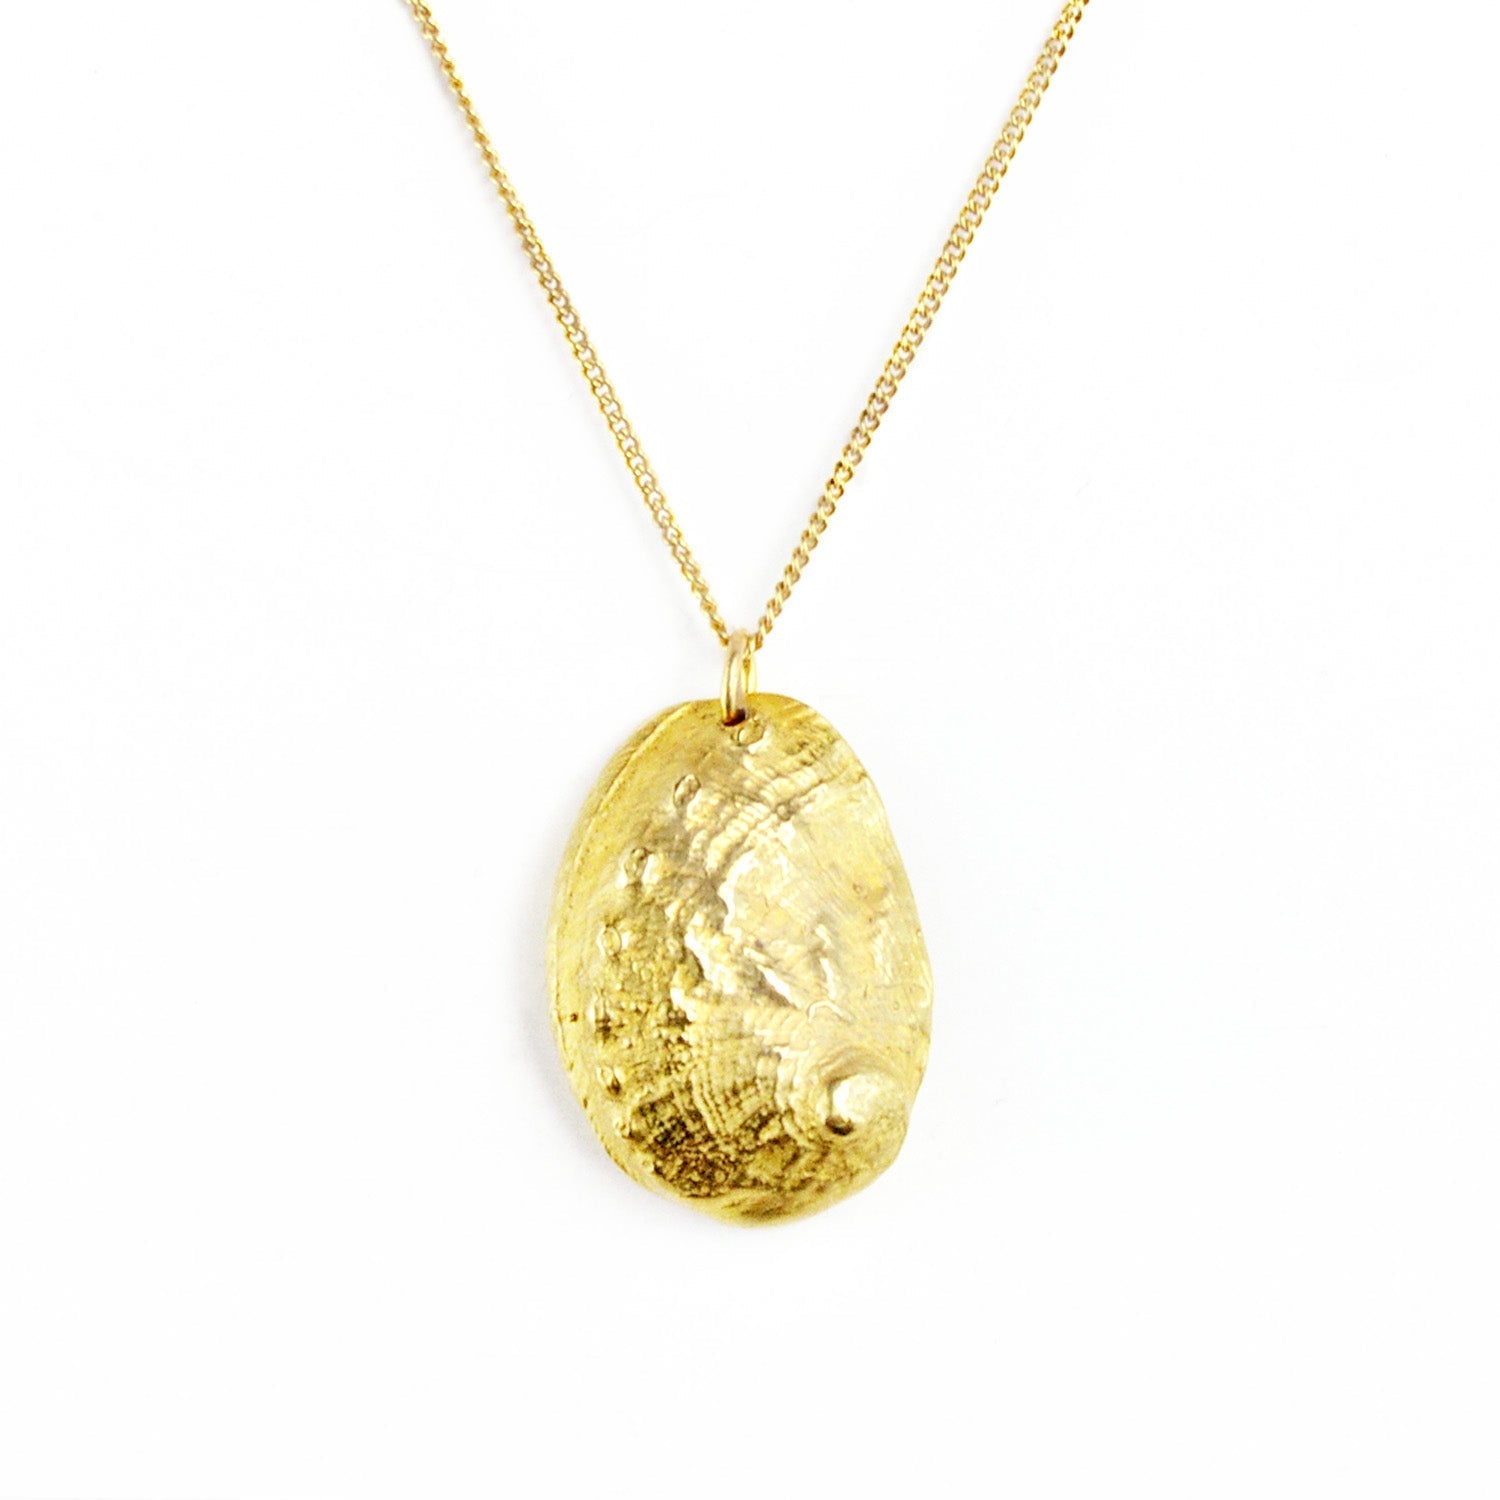 golden bronze abalone shell necklace on white background